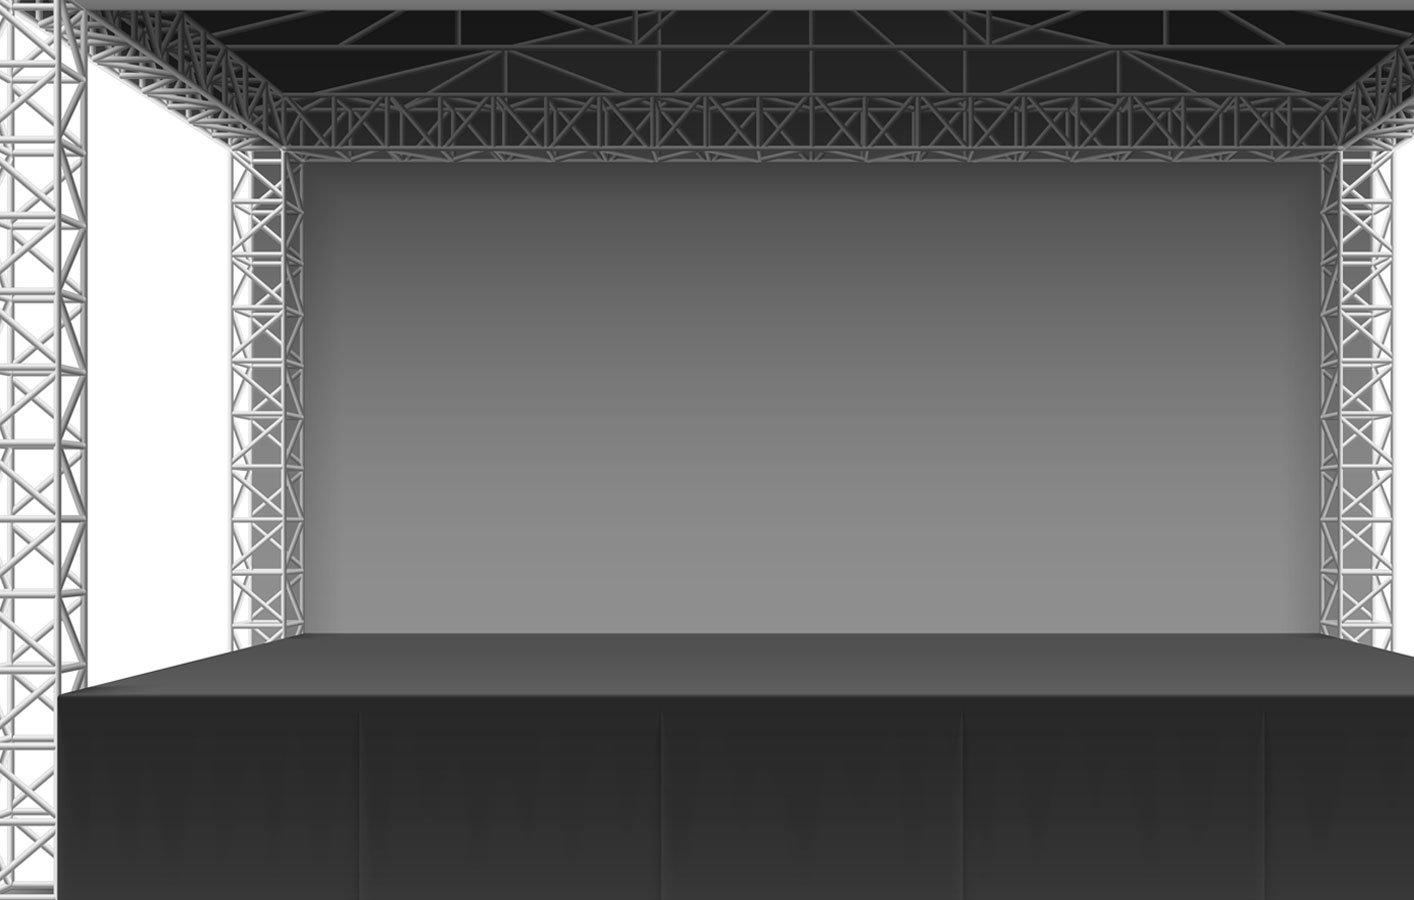 photo of truss structure for stage